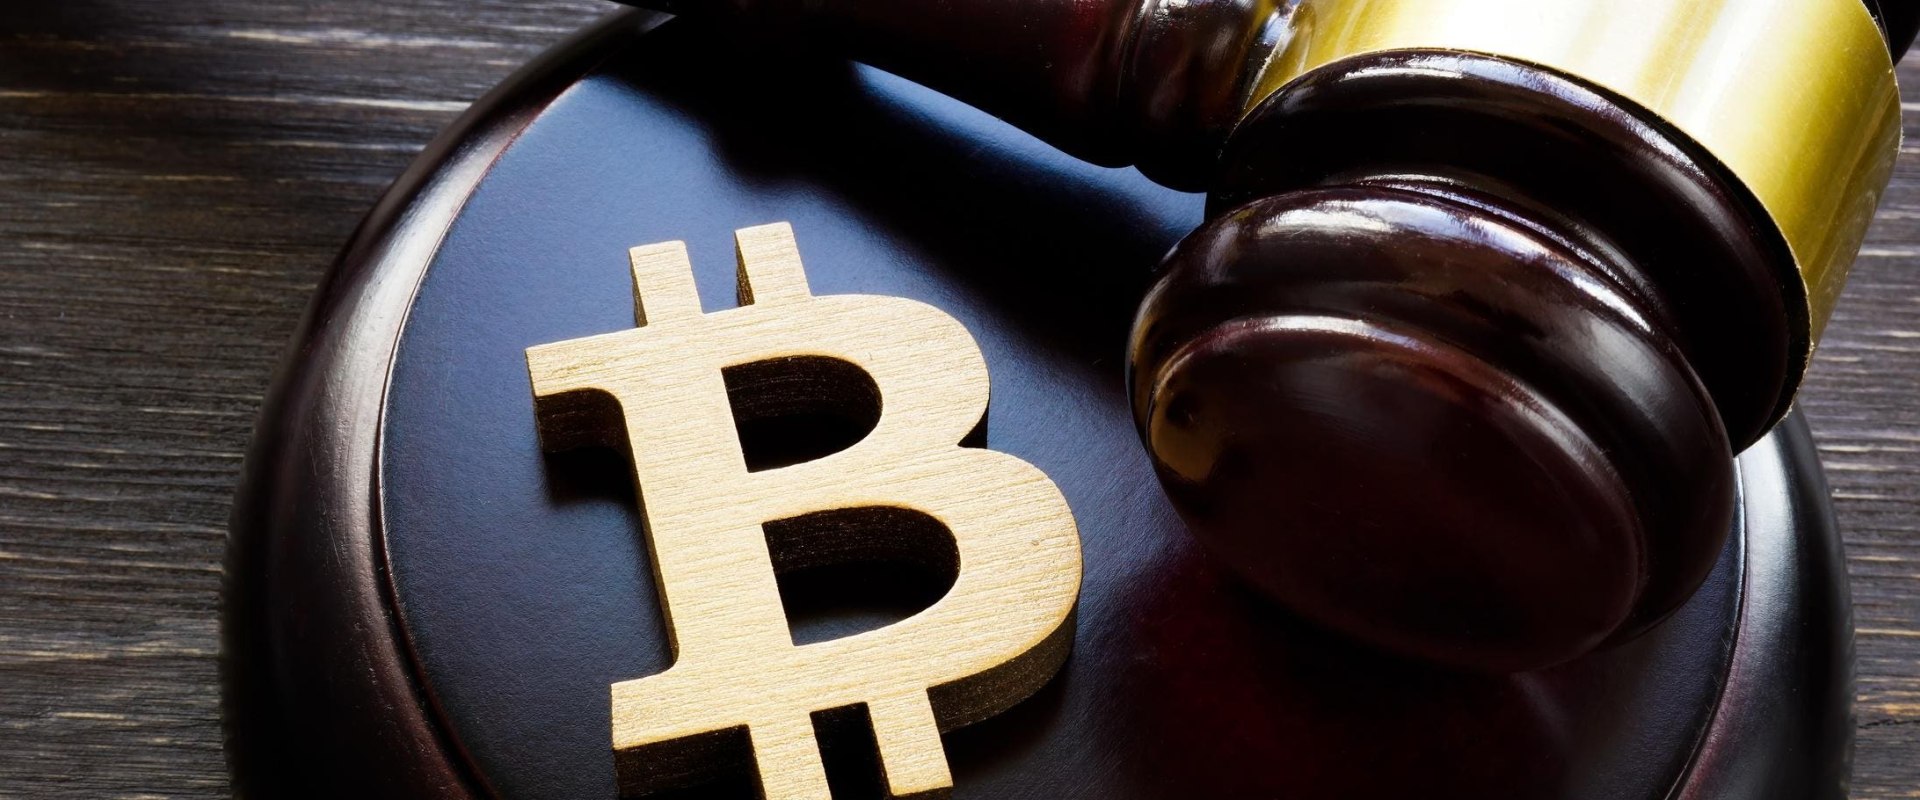 Understanding Government Regulations on Cryptocurrency